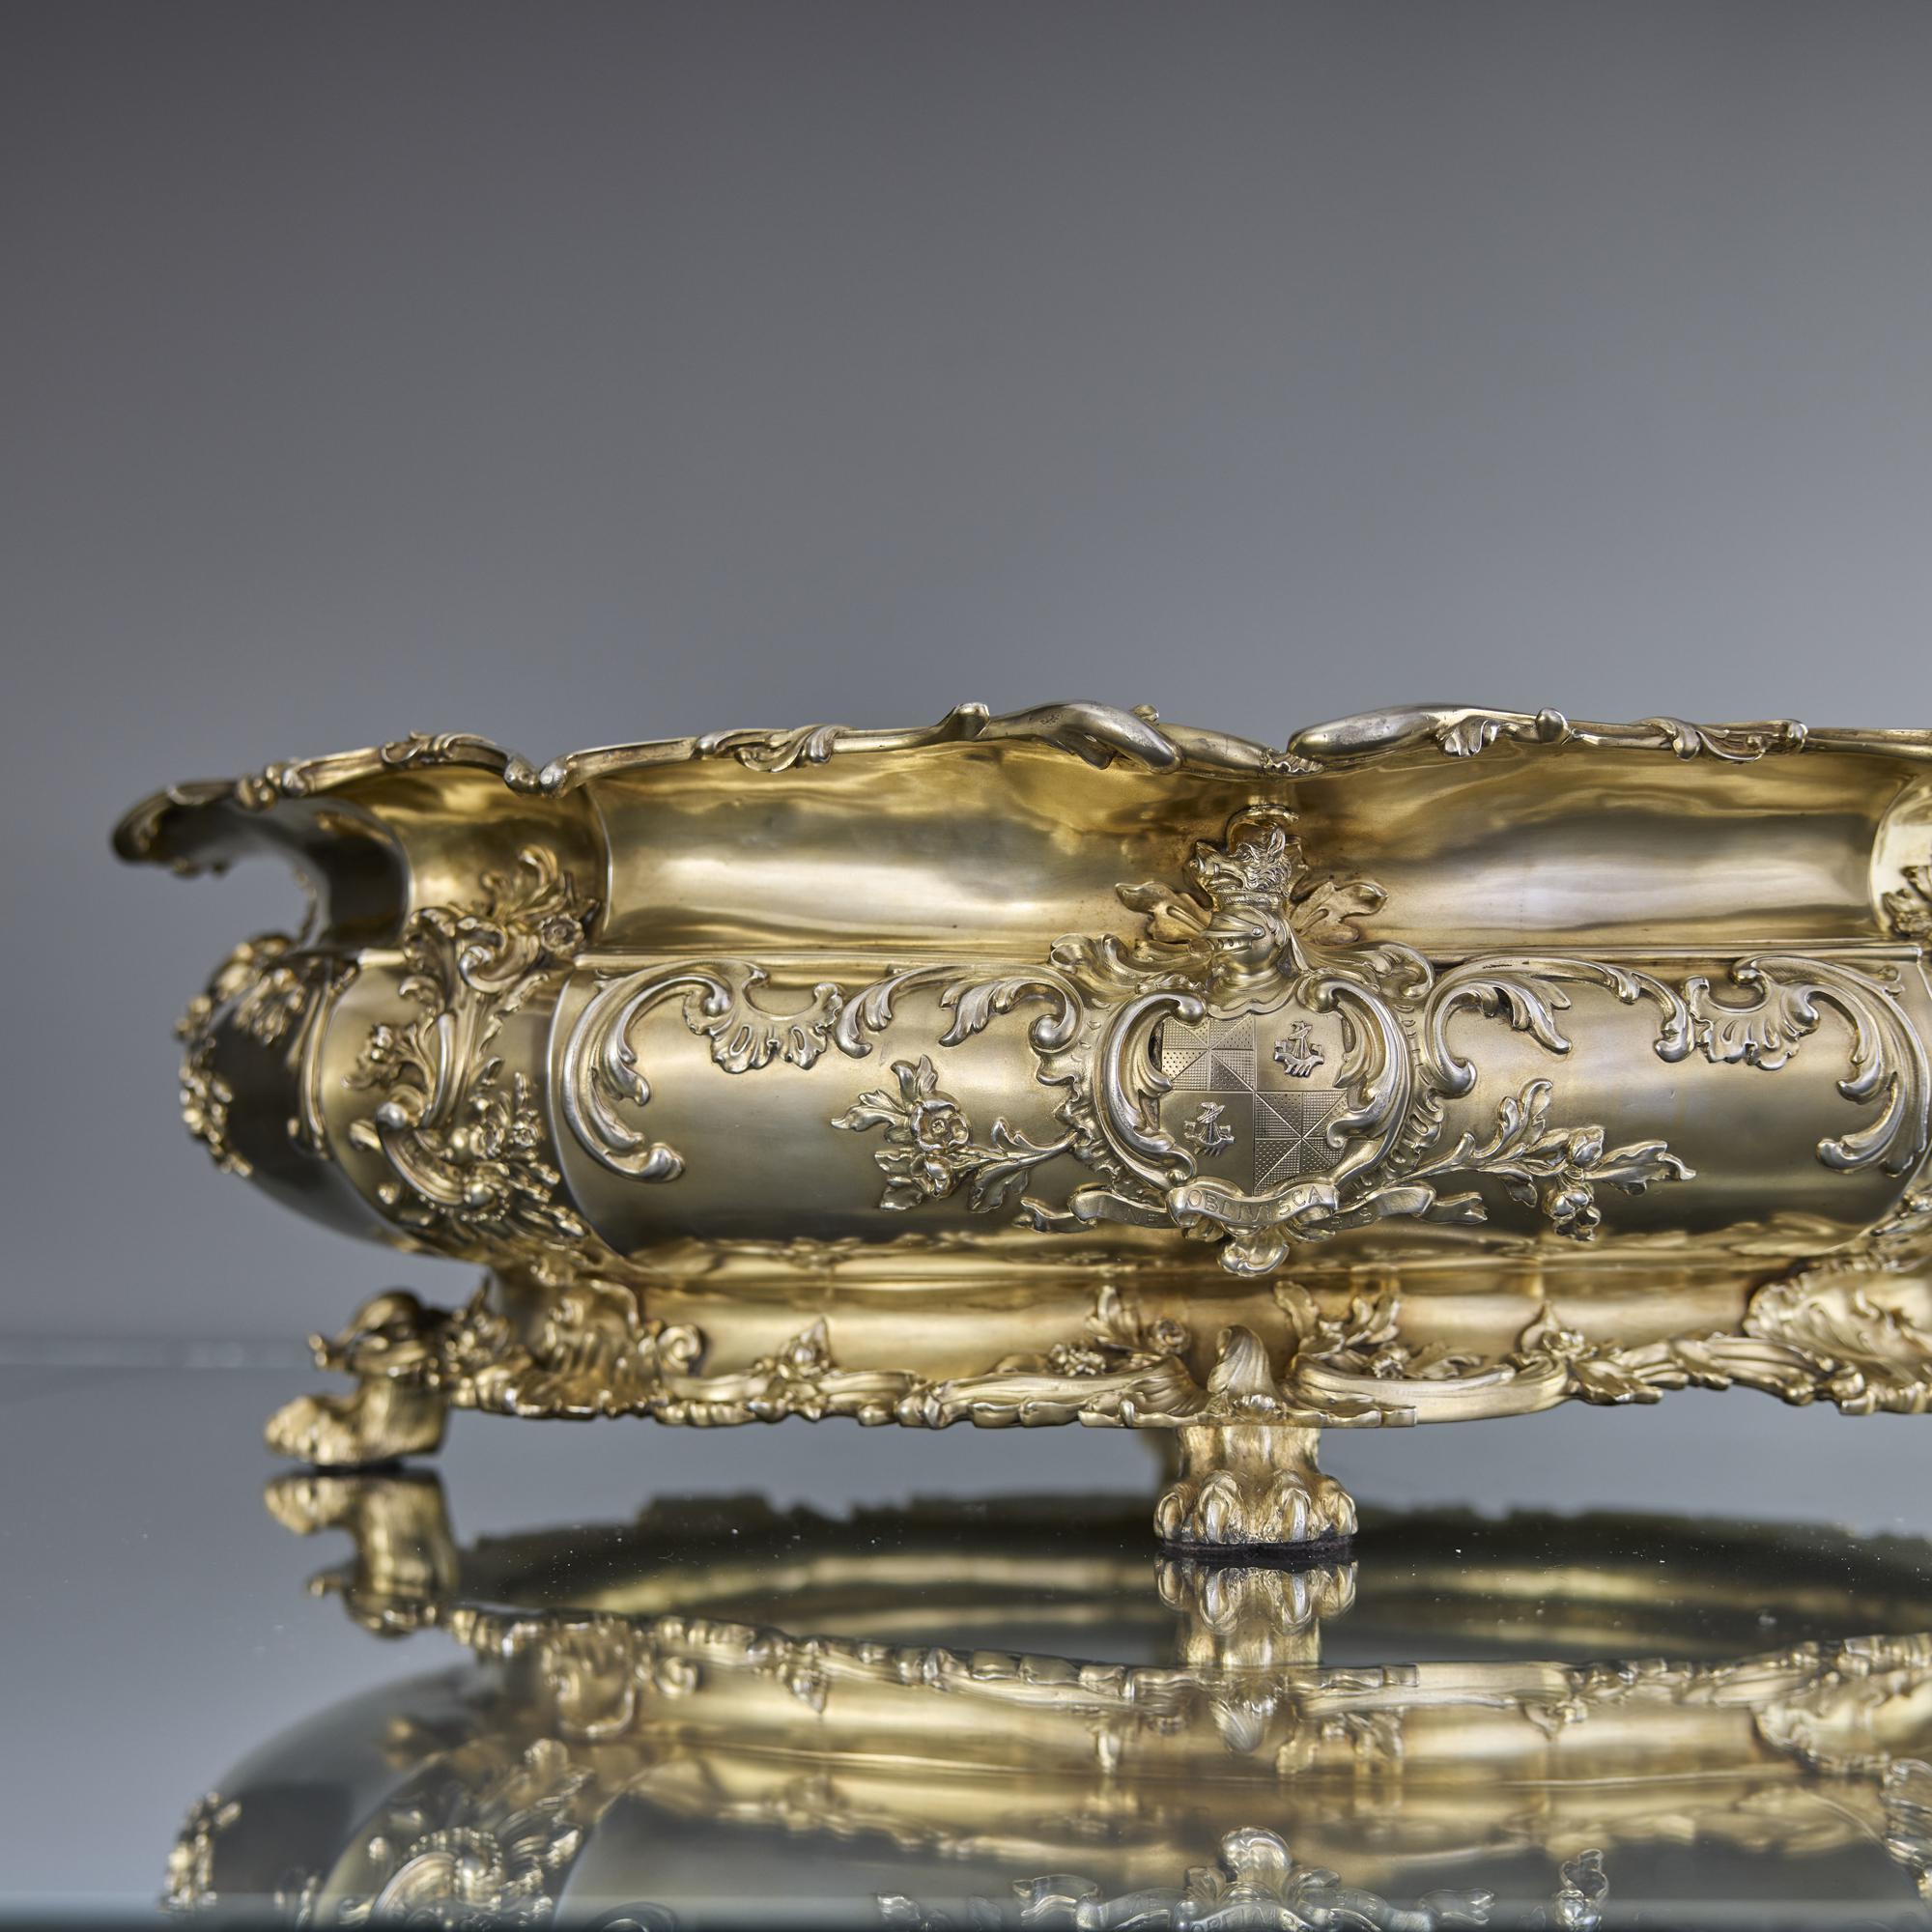 Superb-quality, oval and shaped antique silver-gilt wine cistern of substantial quality and weight resting on lion's paws feet. The body is of elongated shape with foliate and floral decoration around a Rococo revival cartouche featuring the arms of